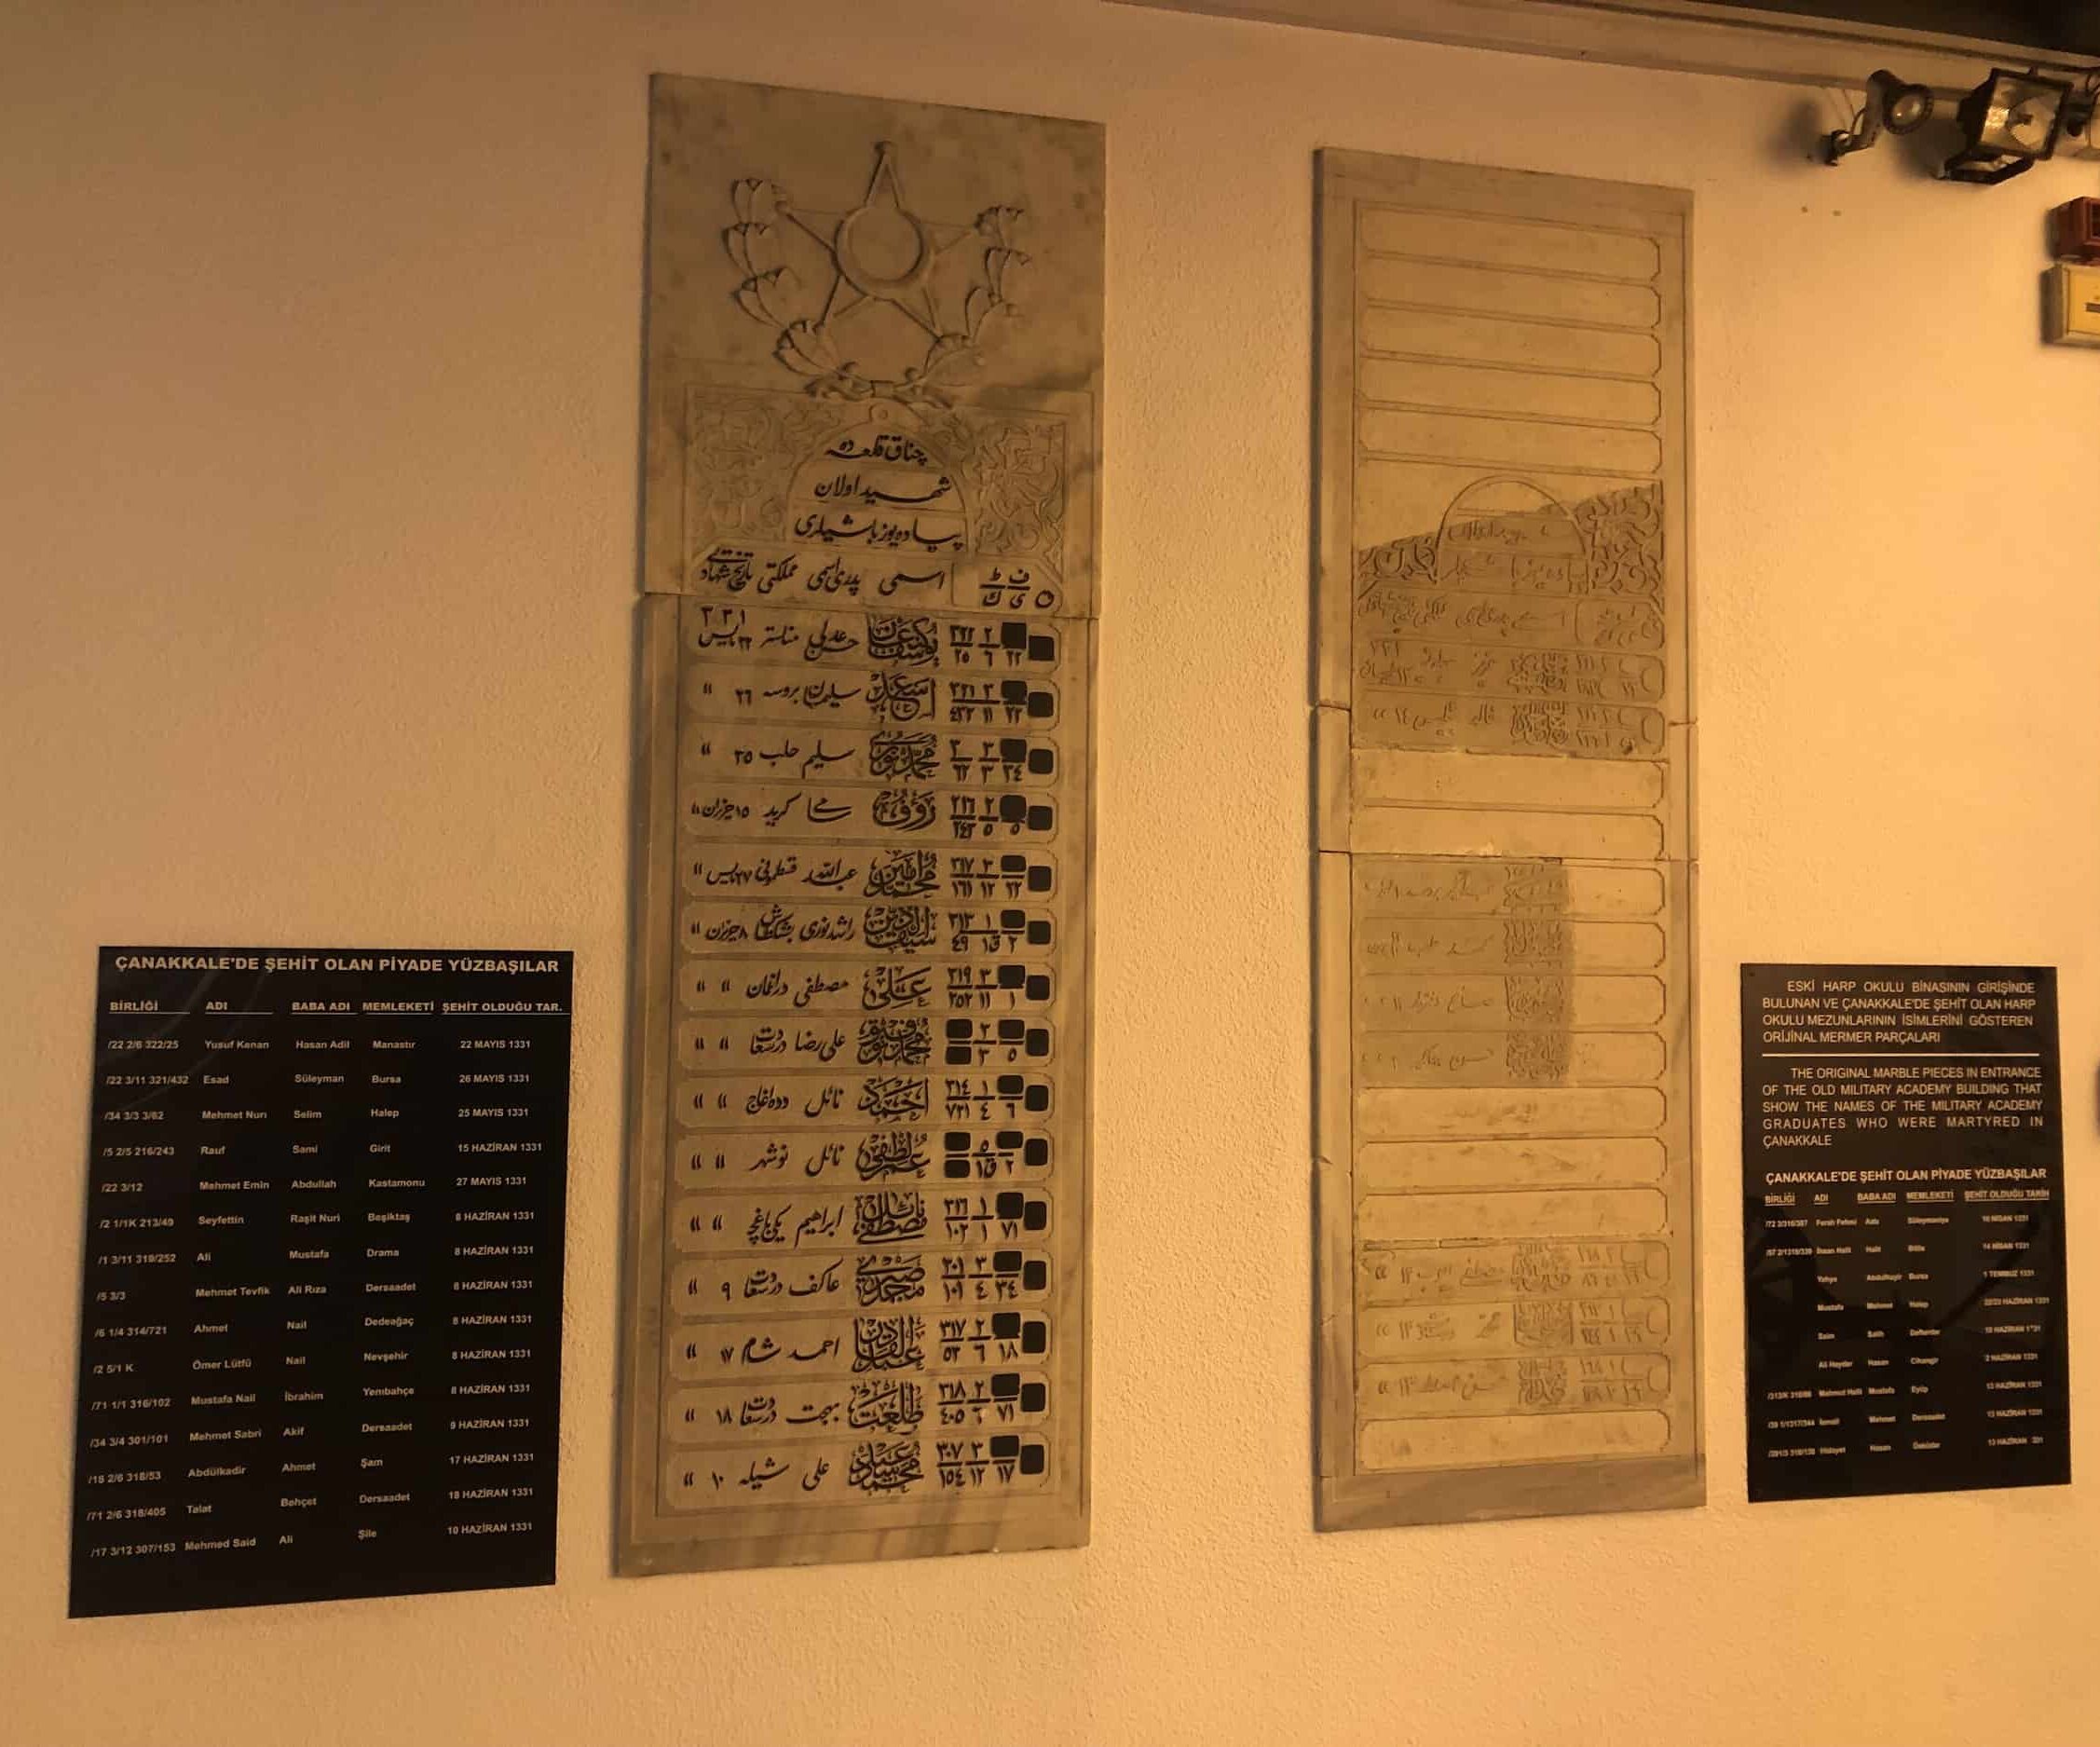 Marble slabs with military academy graduates killed in action during the Gallipoli Campaign in the Gallery of Martyrs at the Harbiye Military Museum in Istanbul, Turkey